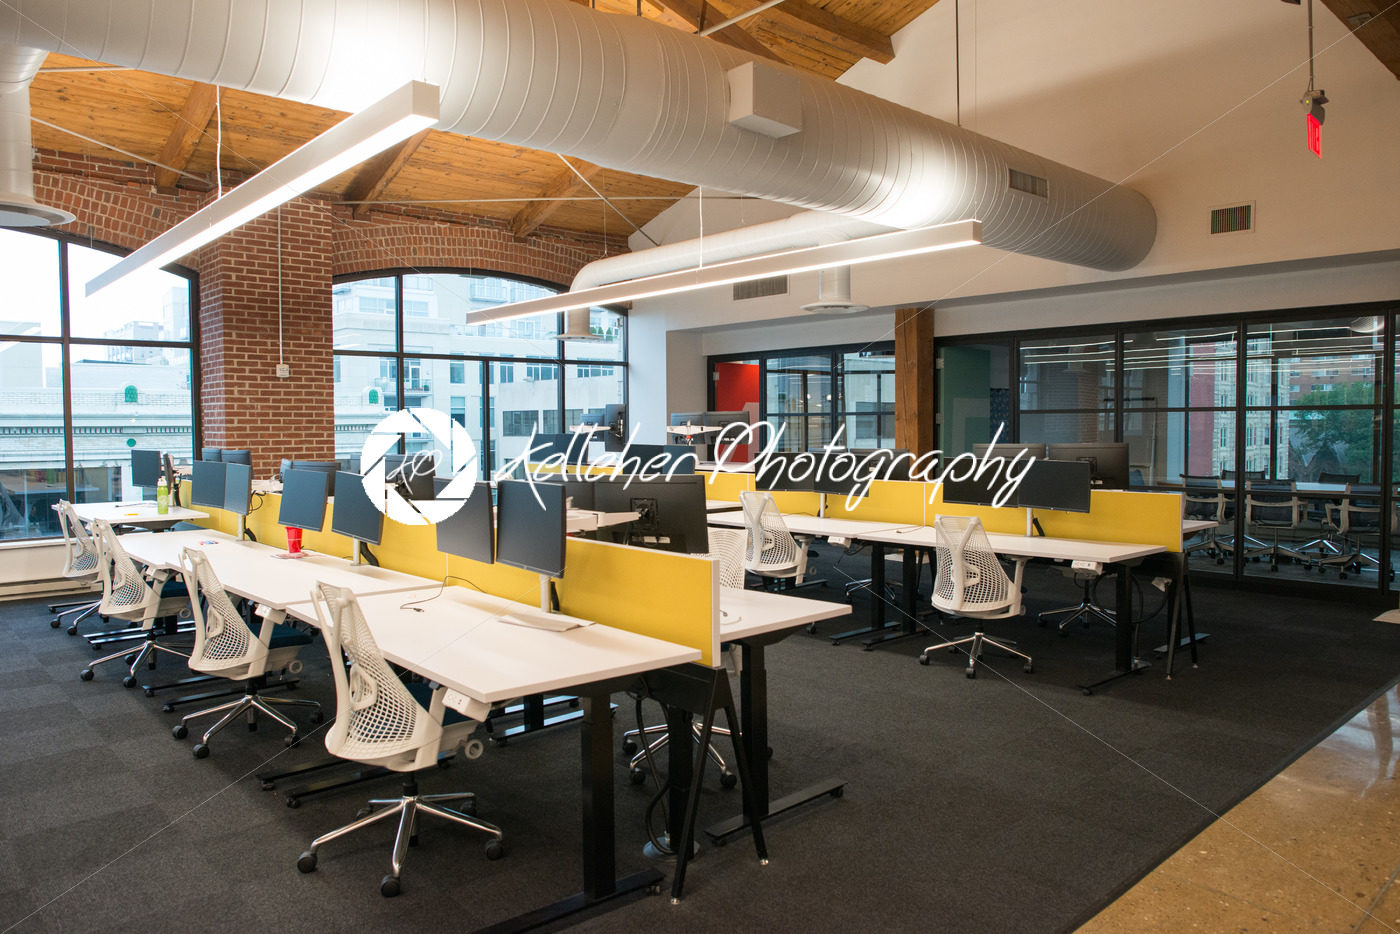 Trendy modern open concept loft office space with big windows, natural light and a layout to encourage collaboration, creativity and innovation - Kelleher Photography Store